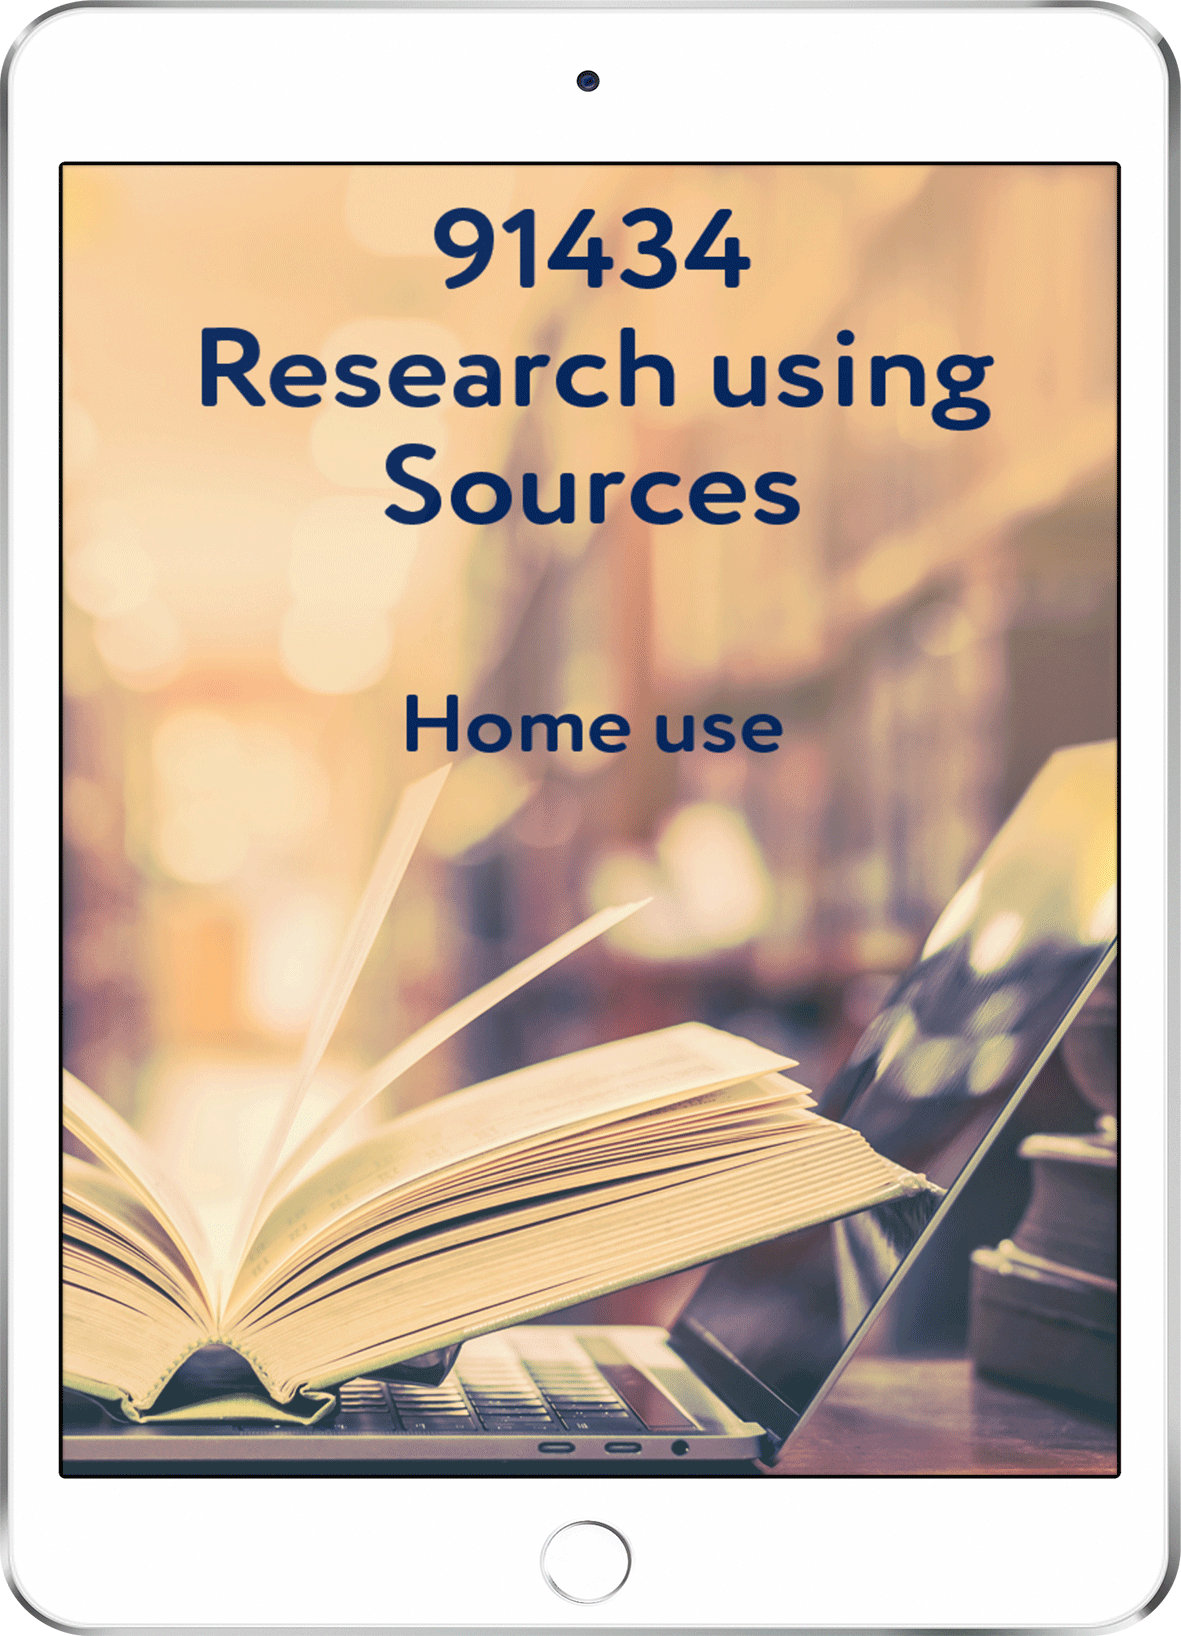 91434 Research using Sources - Home Use